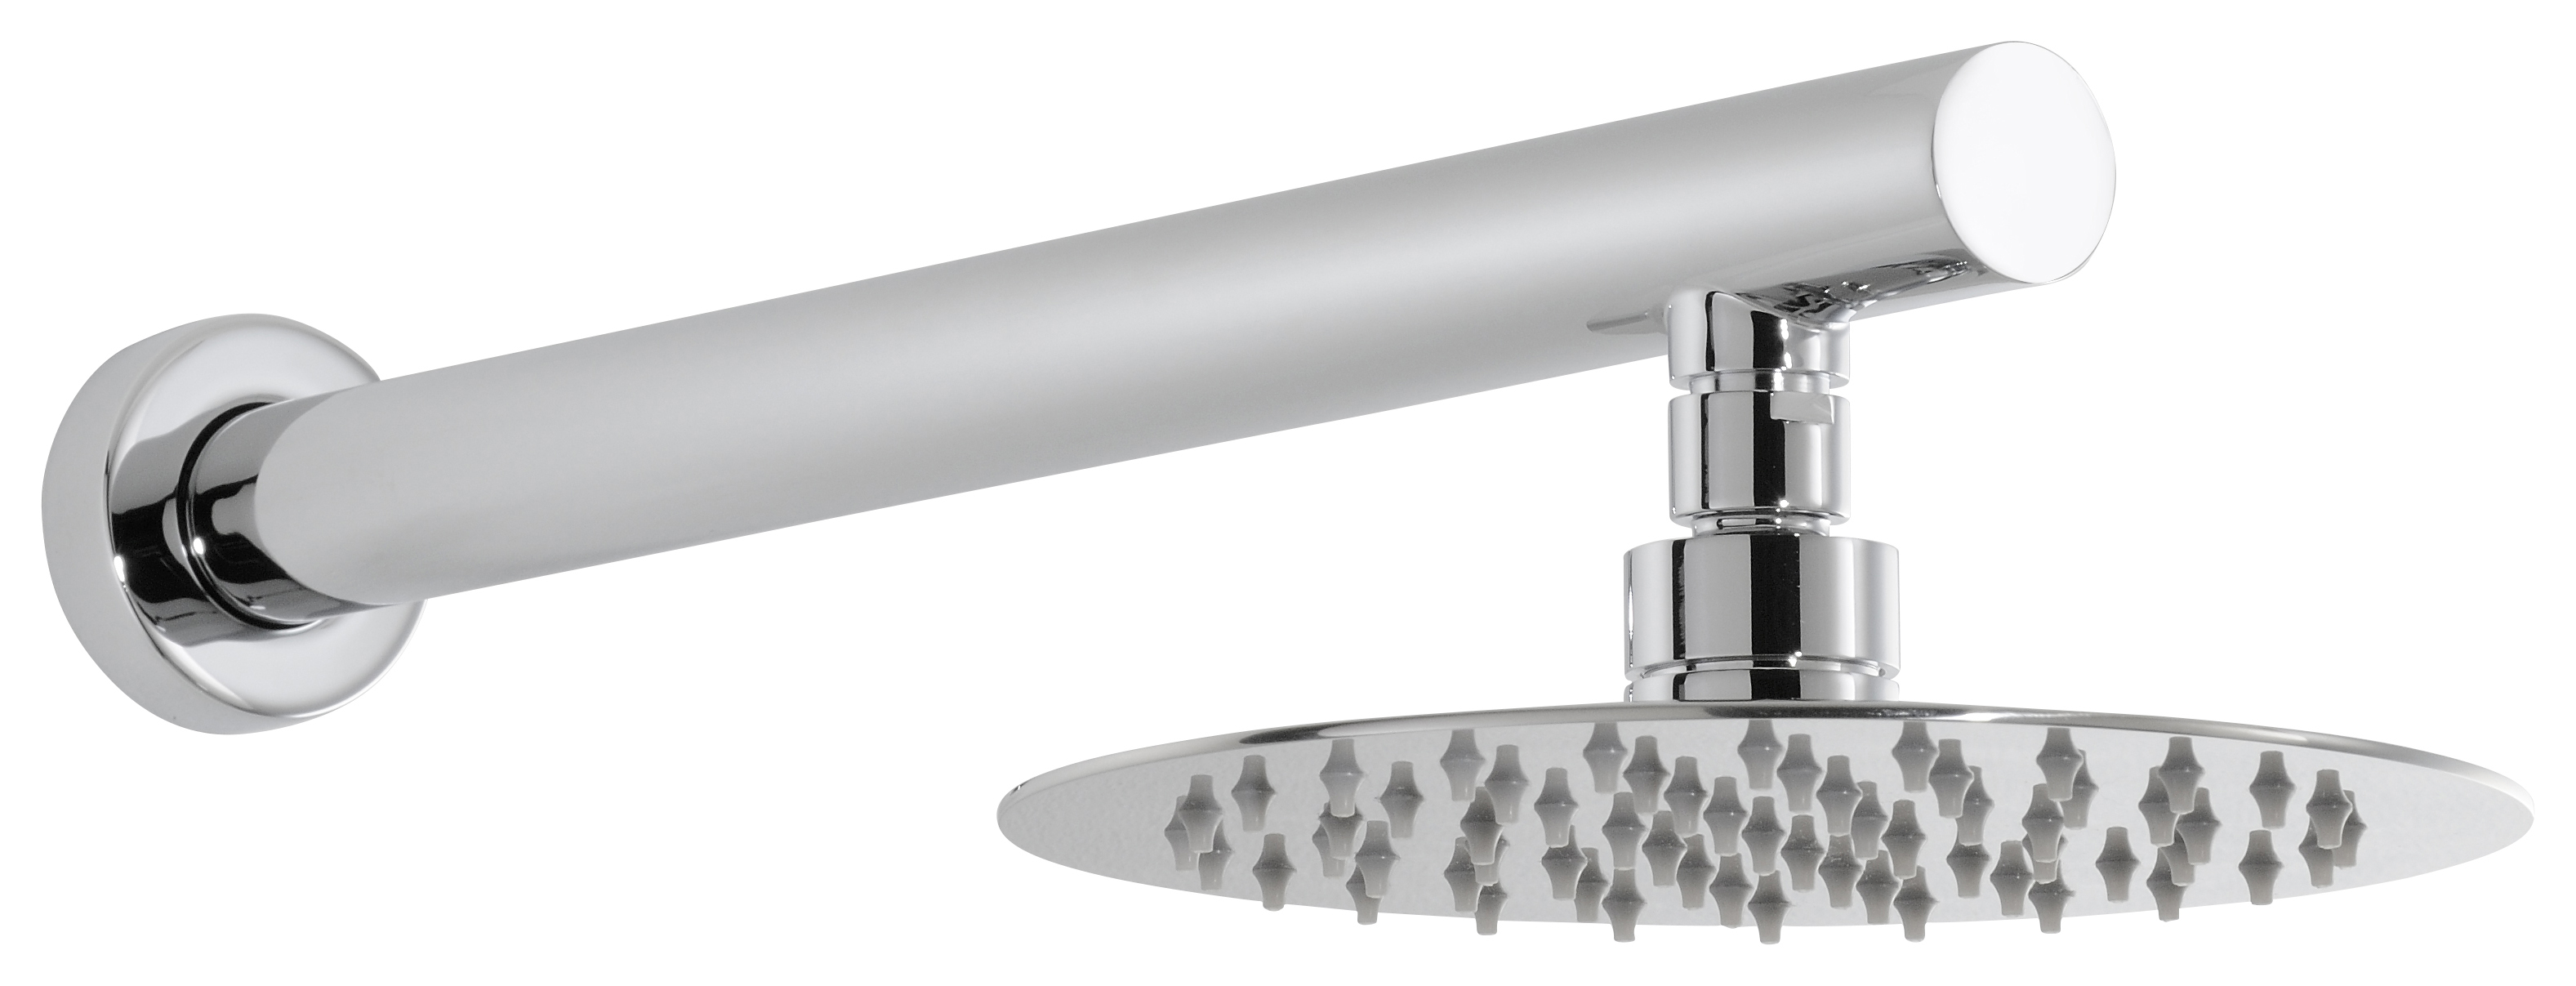 Abode Storm Chrome Wall Mounted Round Shower Head & Arm - 200mm